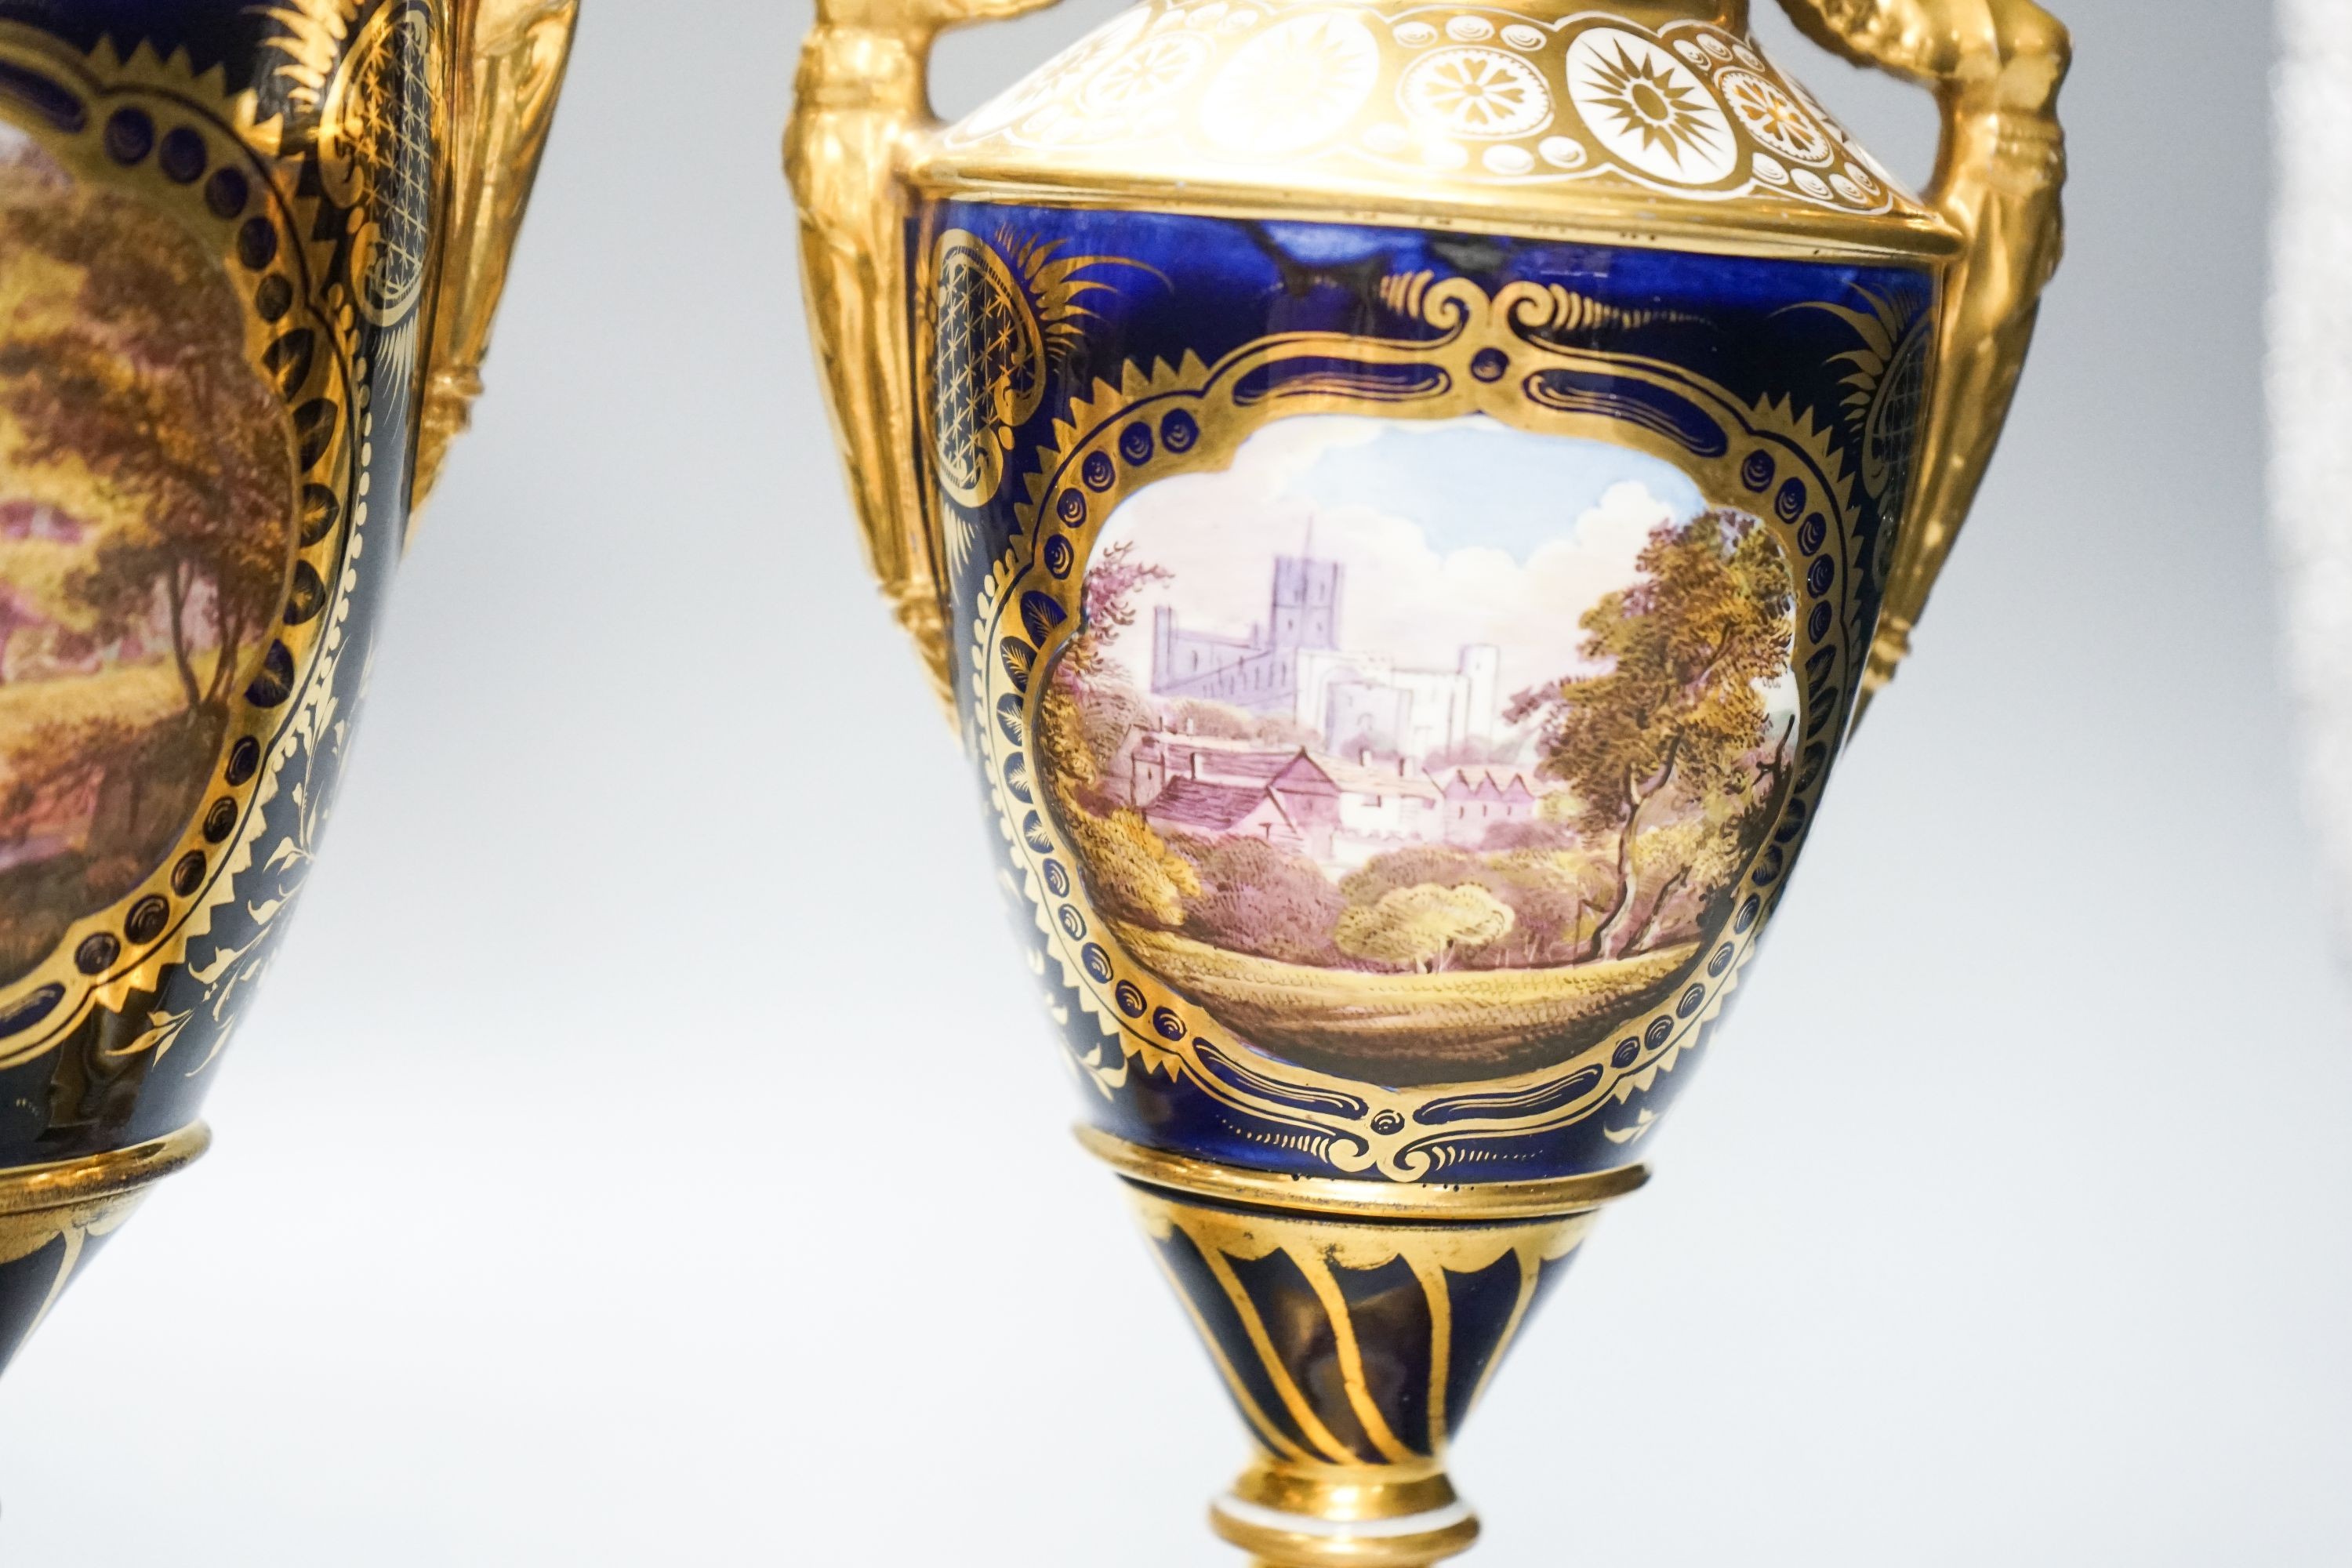 A garniture of three early 19th century English porcelain vases, c.1815-20, each painted with topographical views, tallest 26cm